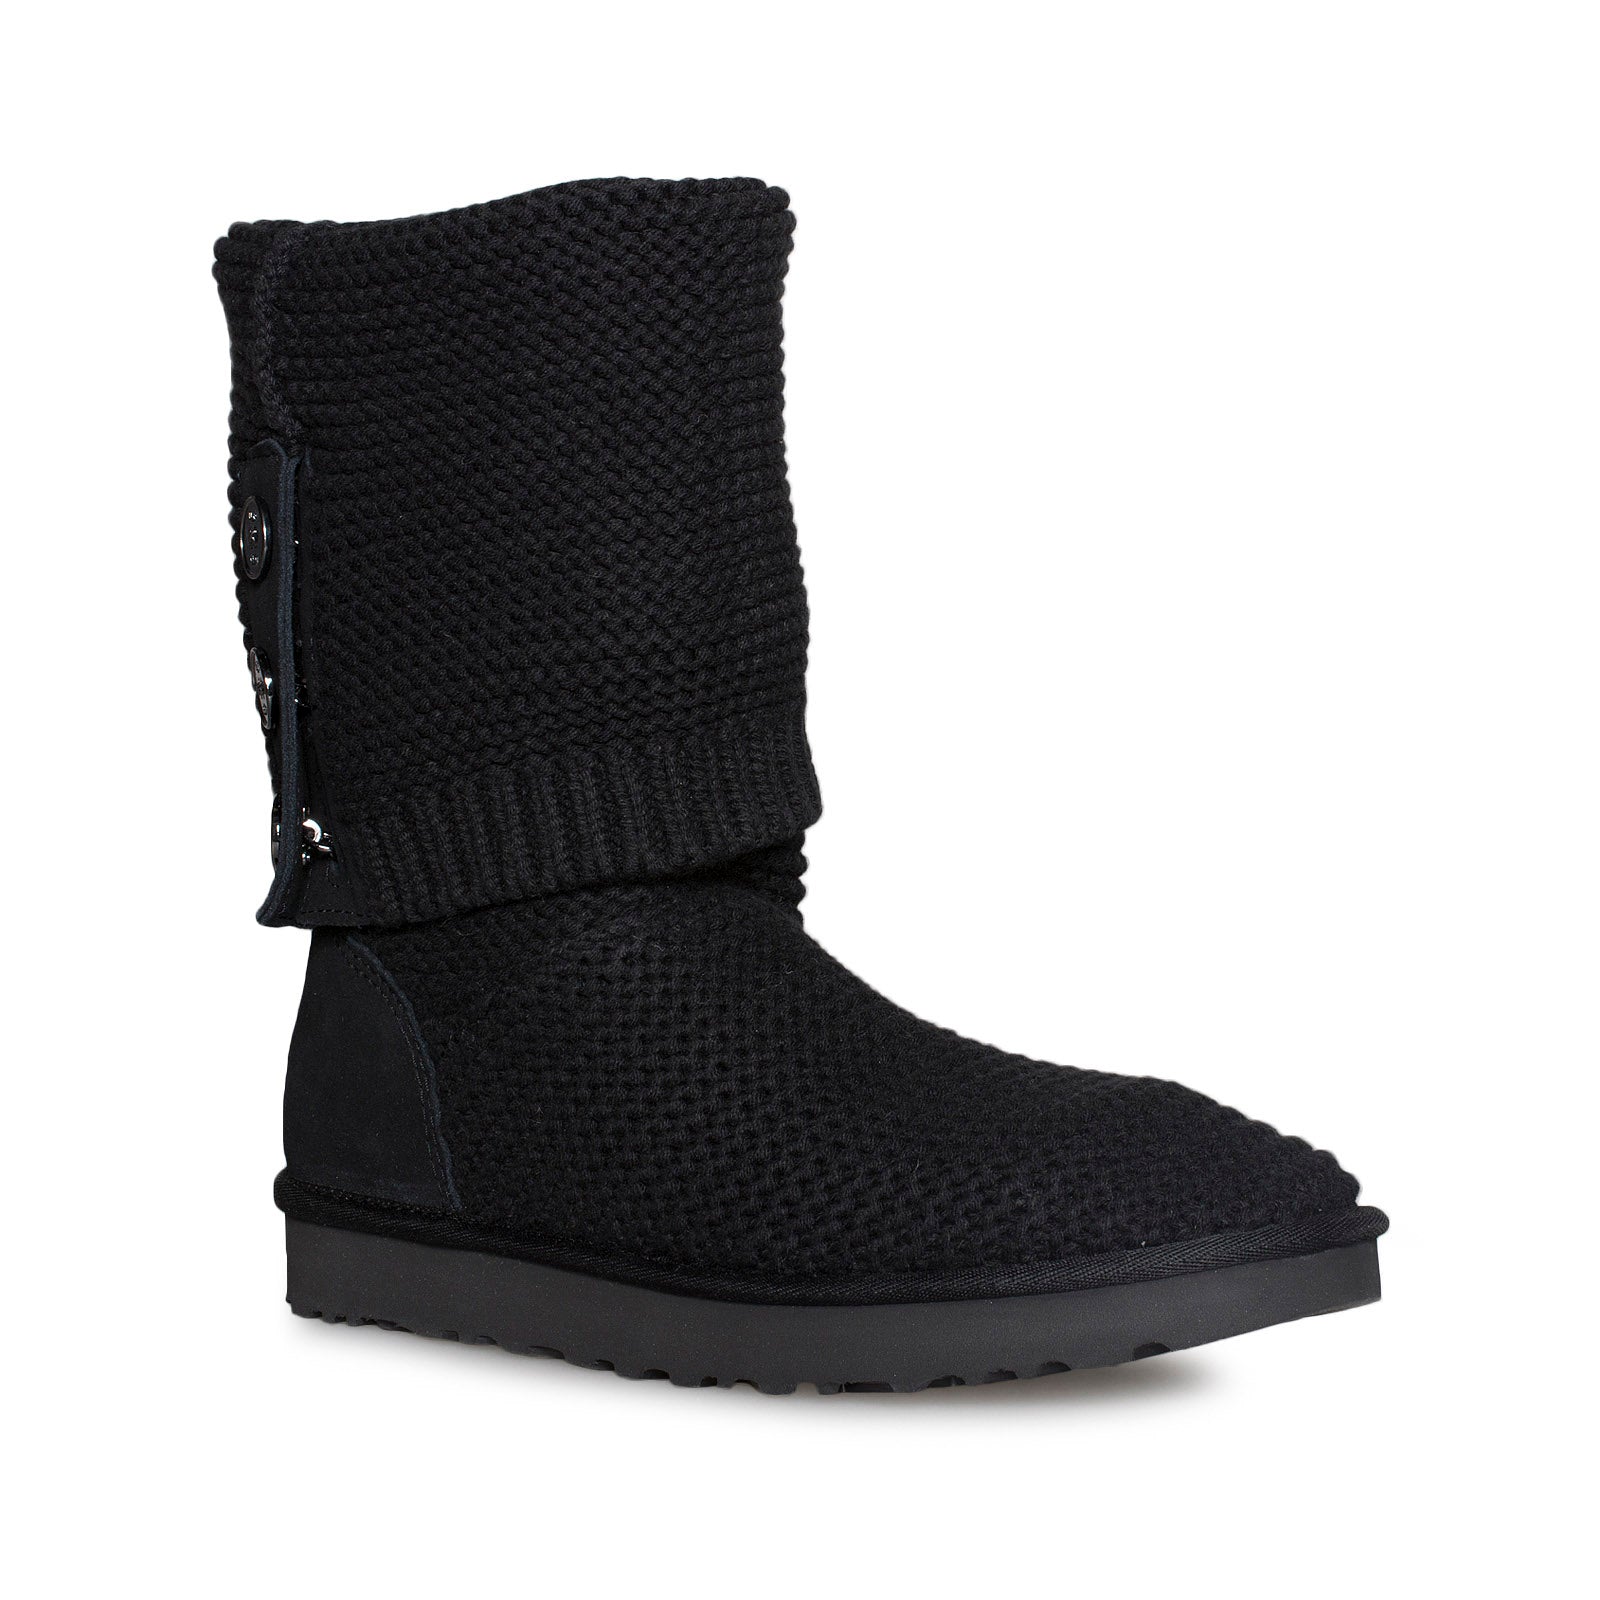 UGG Purl Cardy Knit Black Boots - Women 